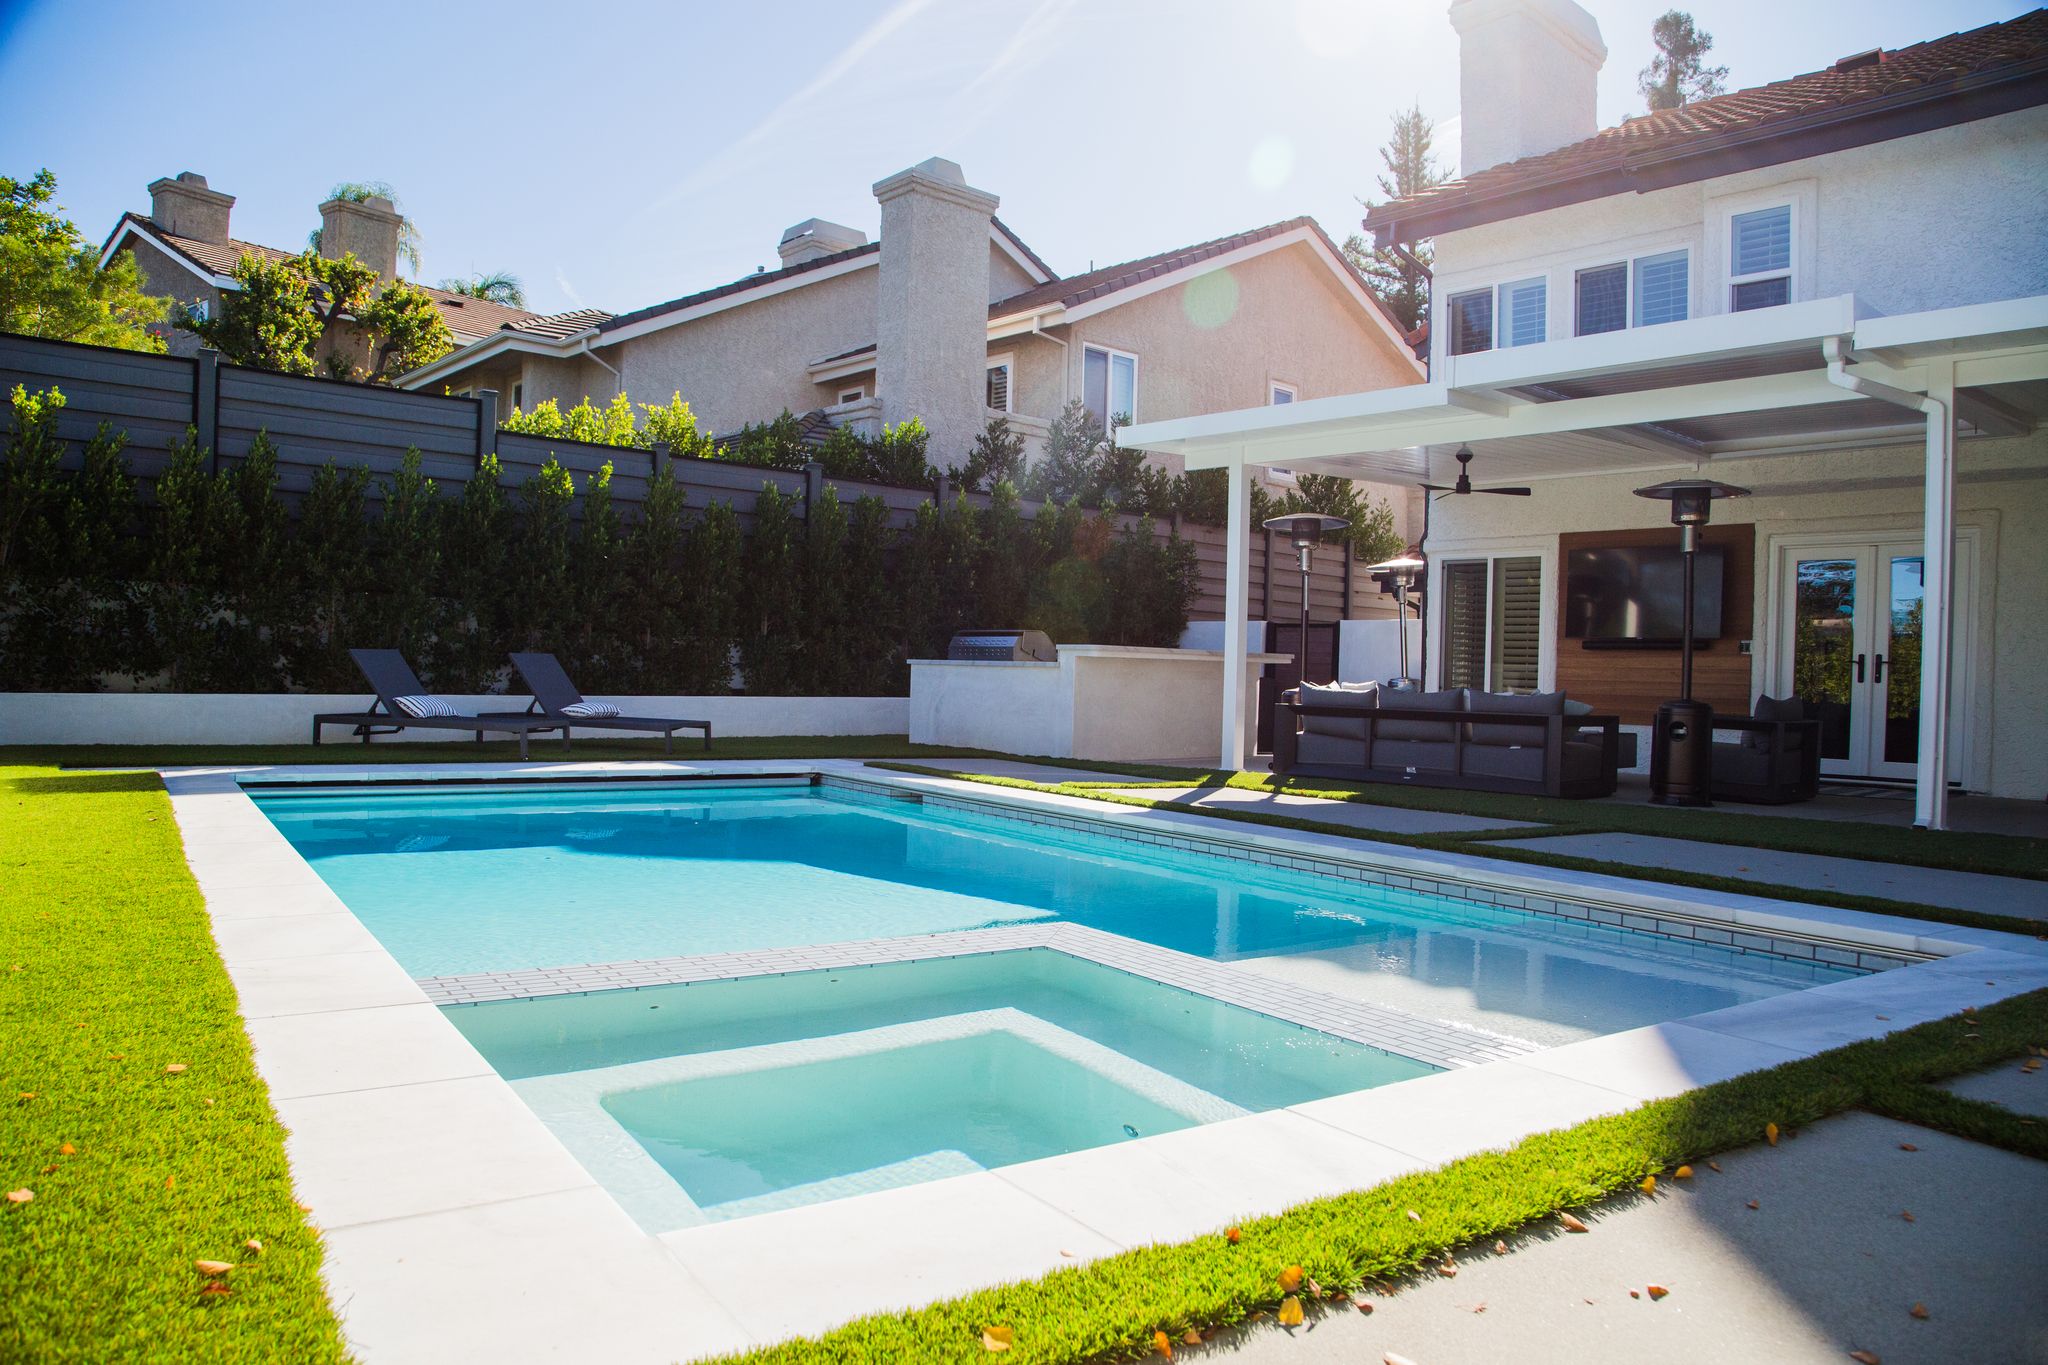 Pool Construction, Pool Cleaning | Thousand Oaks & Agoura Hills